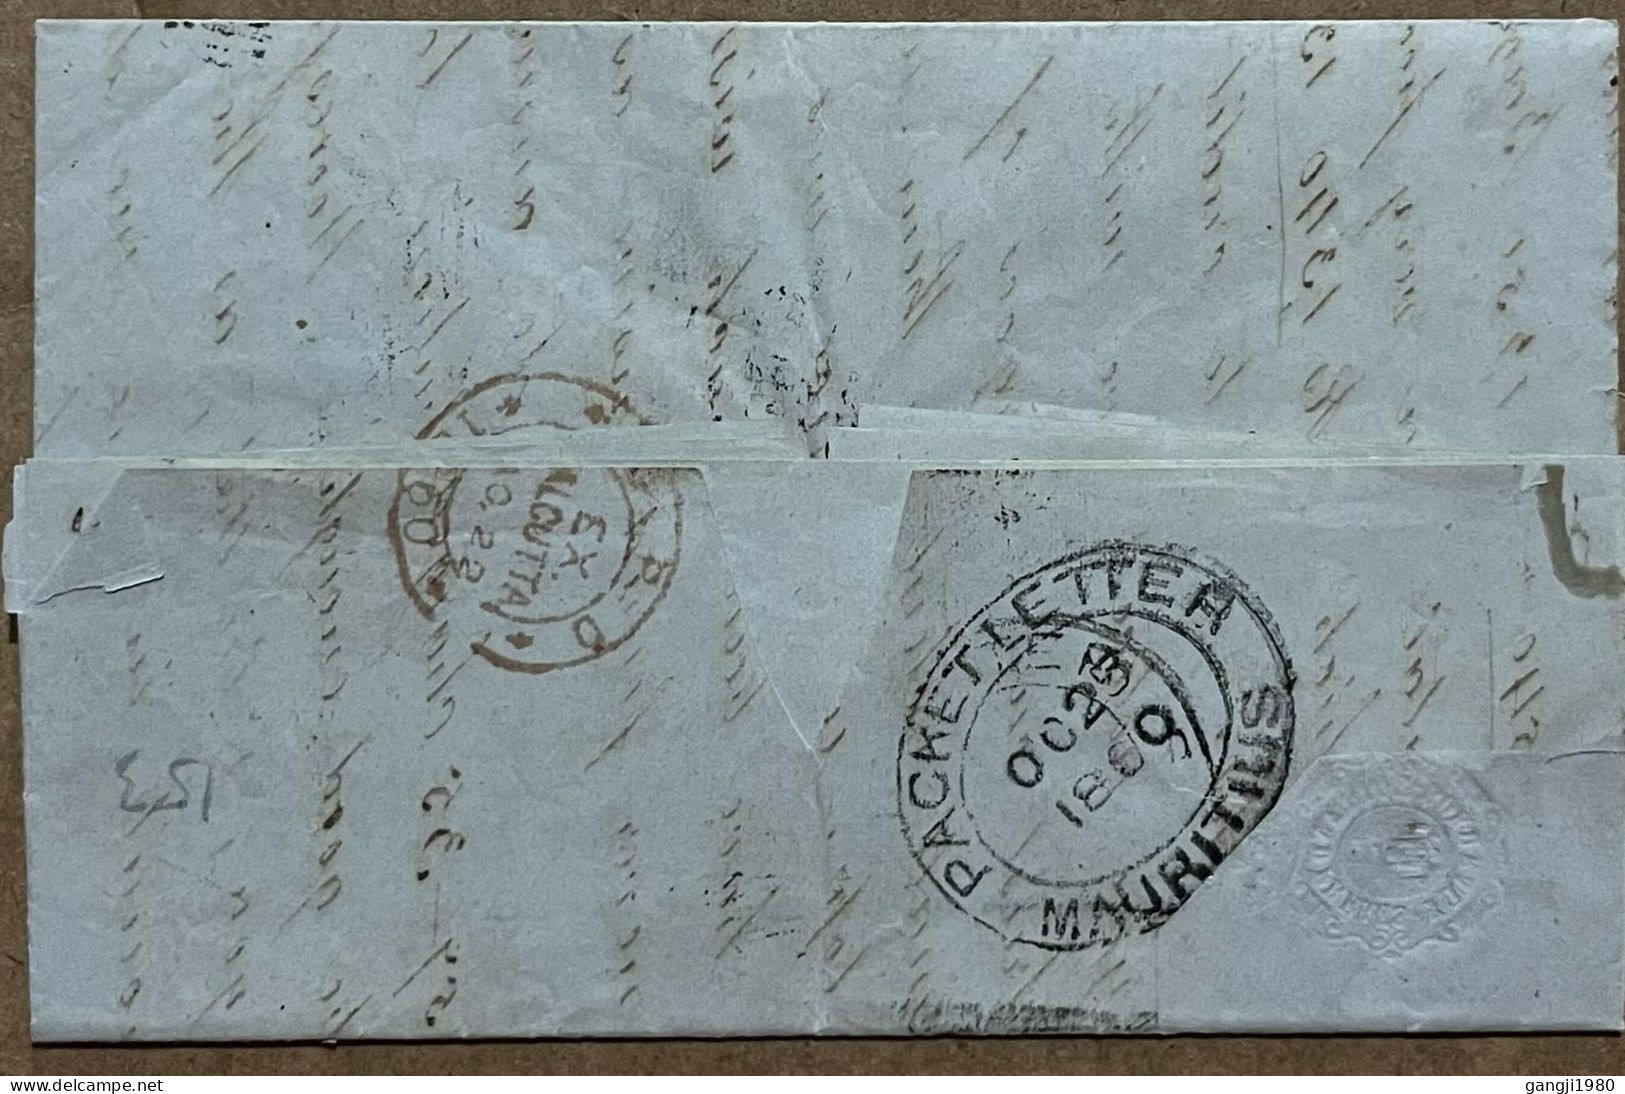 INDIA TO MAURITIUS 1860, INDIA PAID IN BOX, PACKET LETTER MAURITIUS & CALCUTTA RED CANCEL, STEAMER BENGAL VIA ADEN HAND - 1858-79 Crown Colony